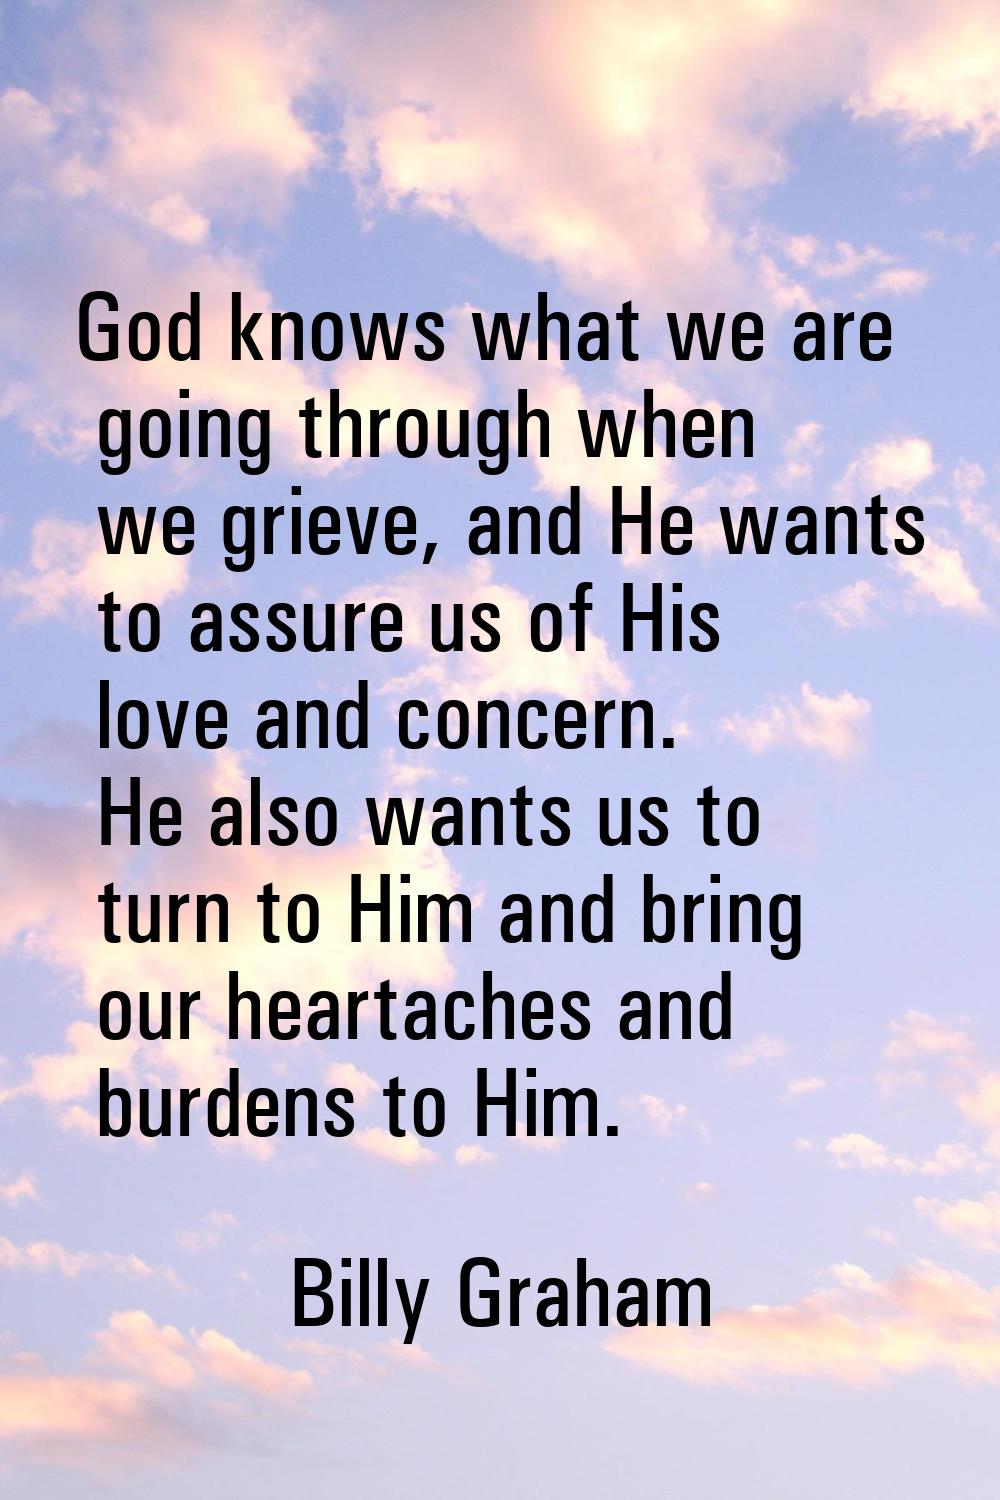 God knows what we are going through when we grieve, and He wants to assure us of His love and conce